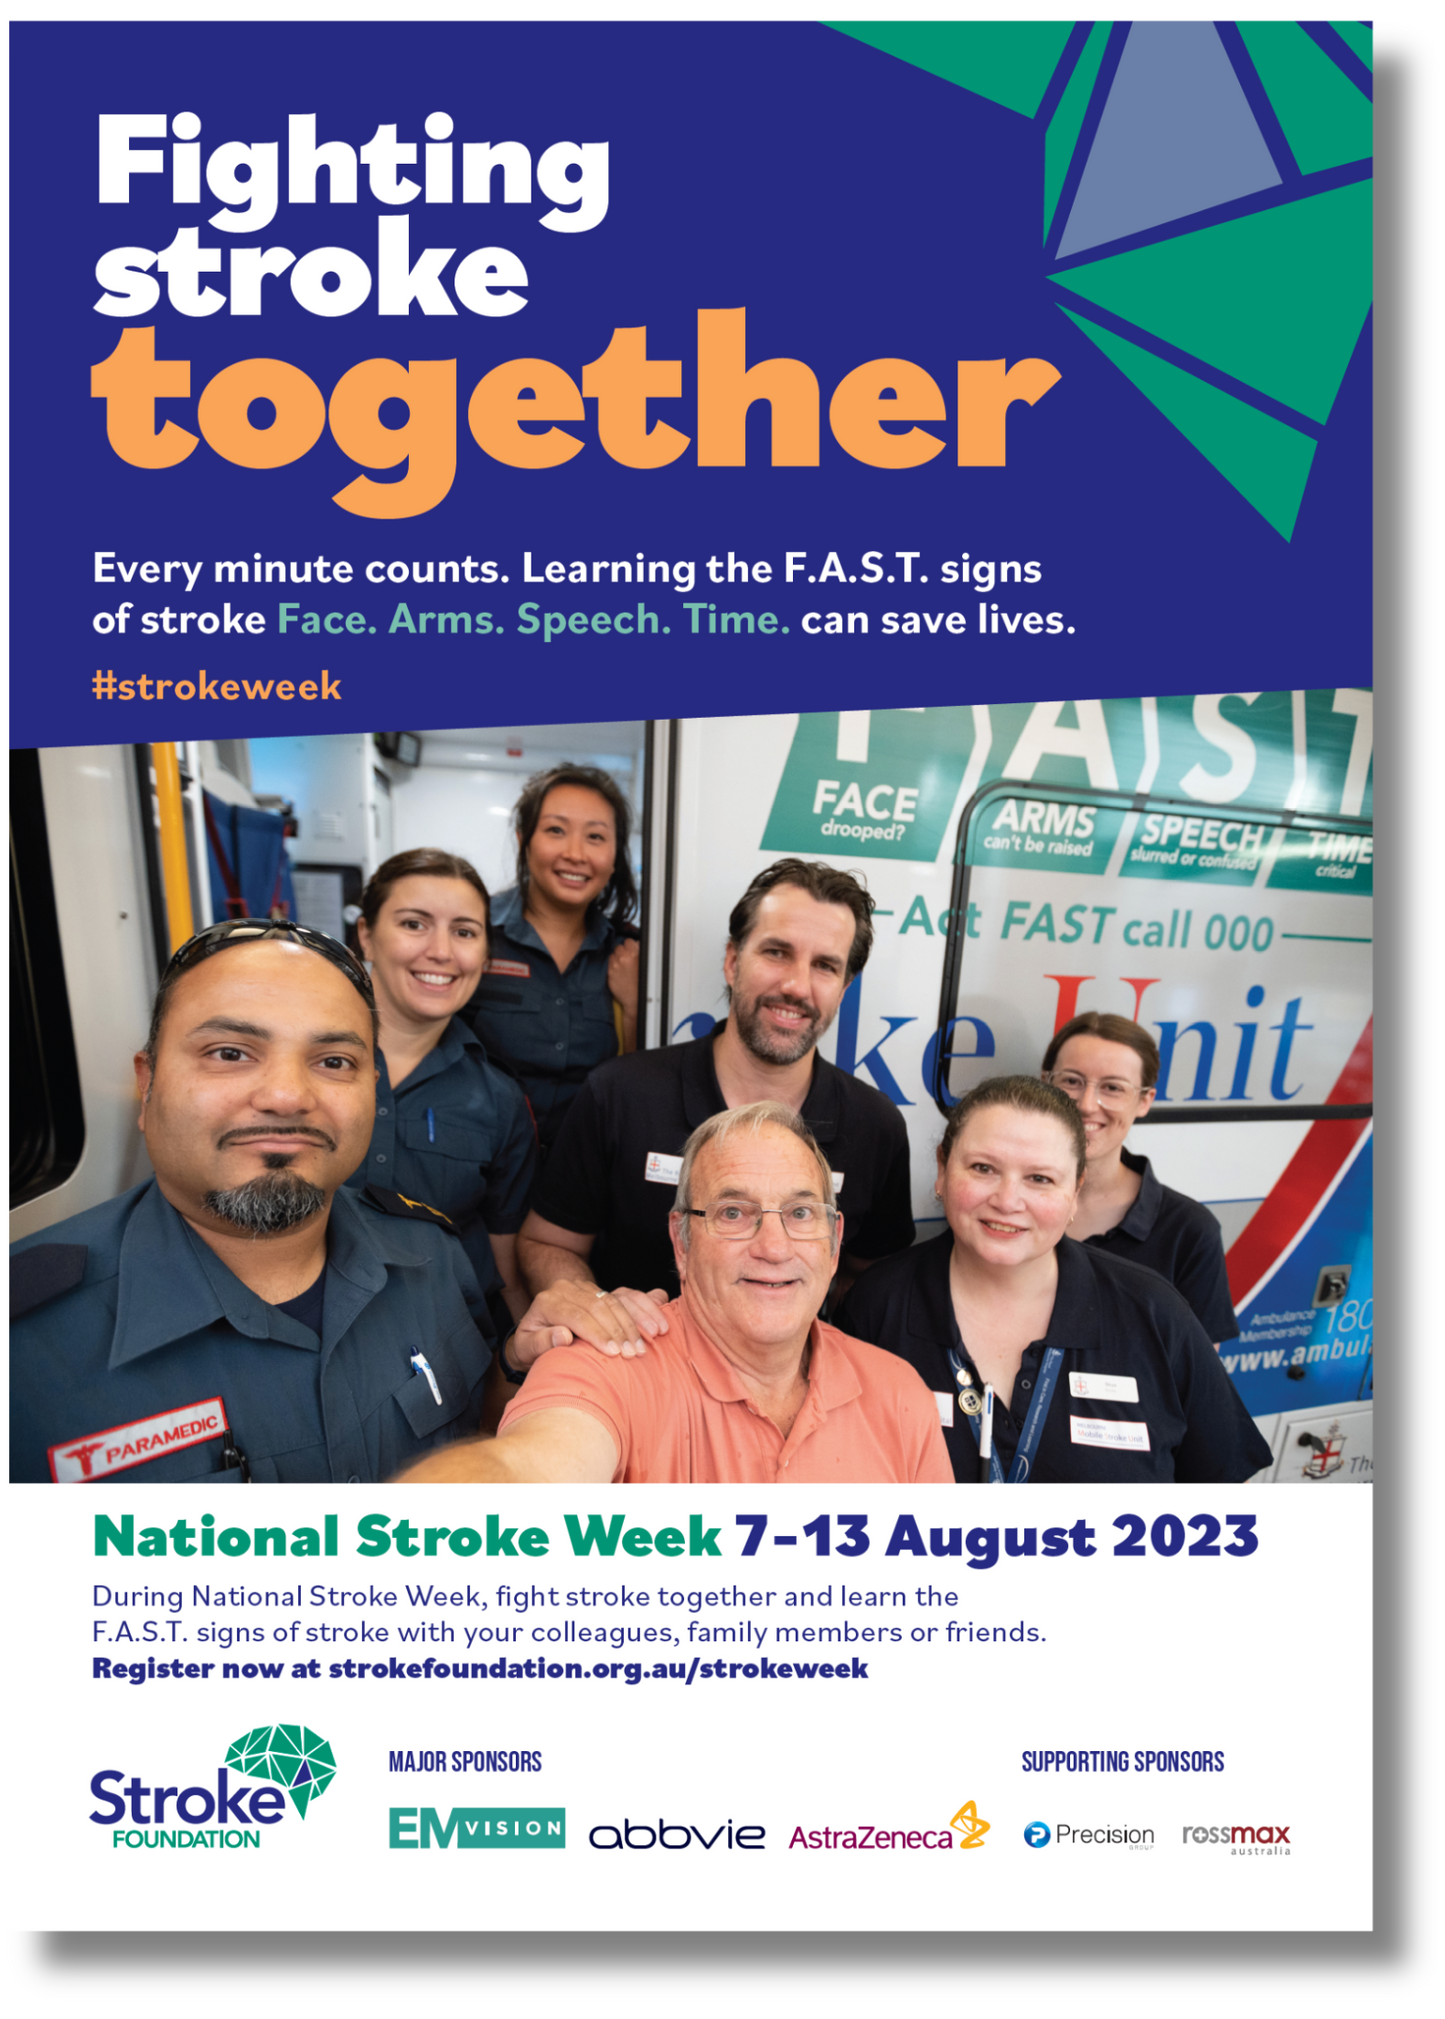 National Stroke Week 2023 campaign poster